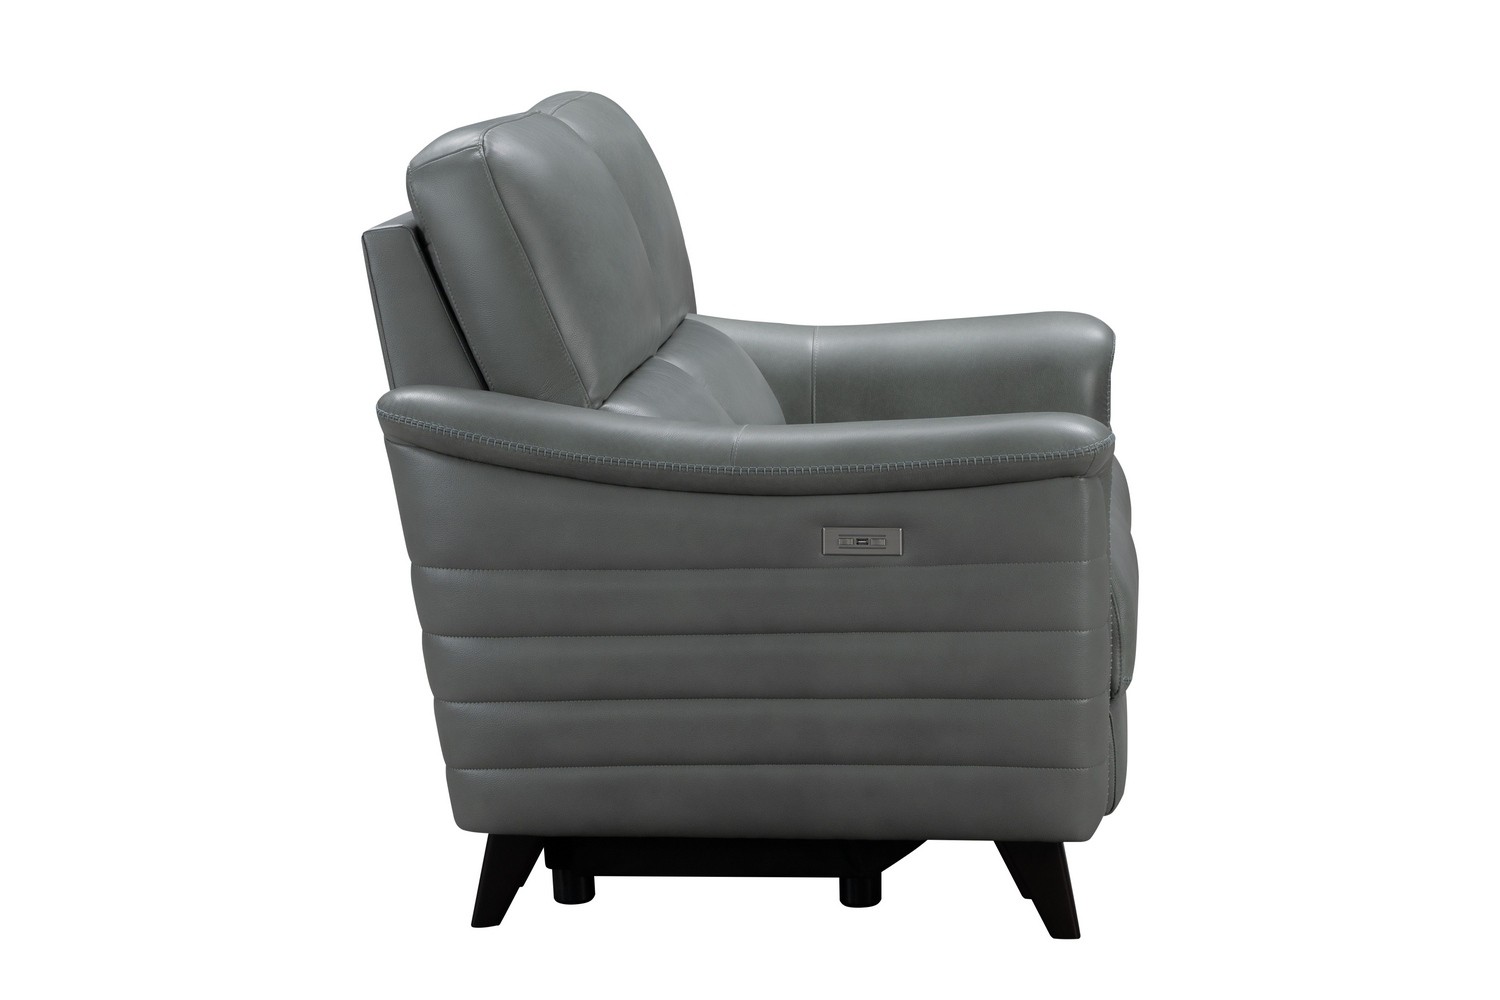 Barcalounger Malone Power Reclining Loveseat with Power Head Rests - Antonio Green Gray/Leather Match